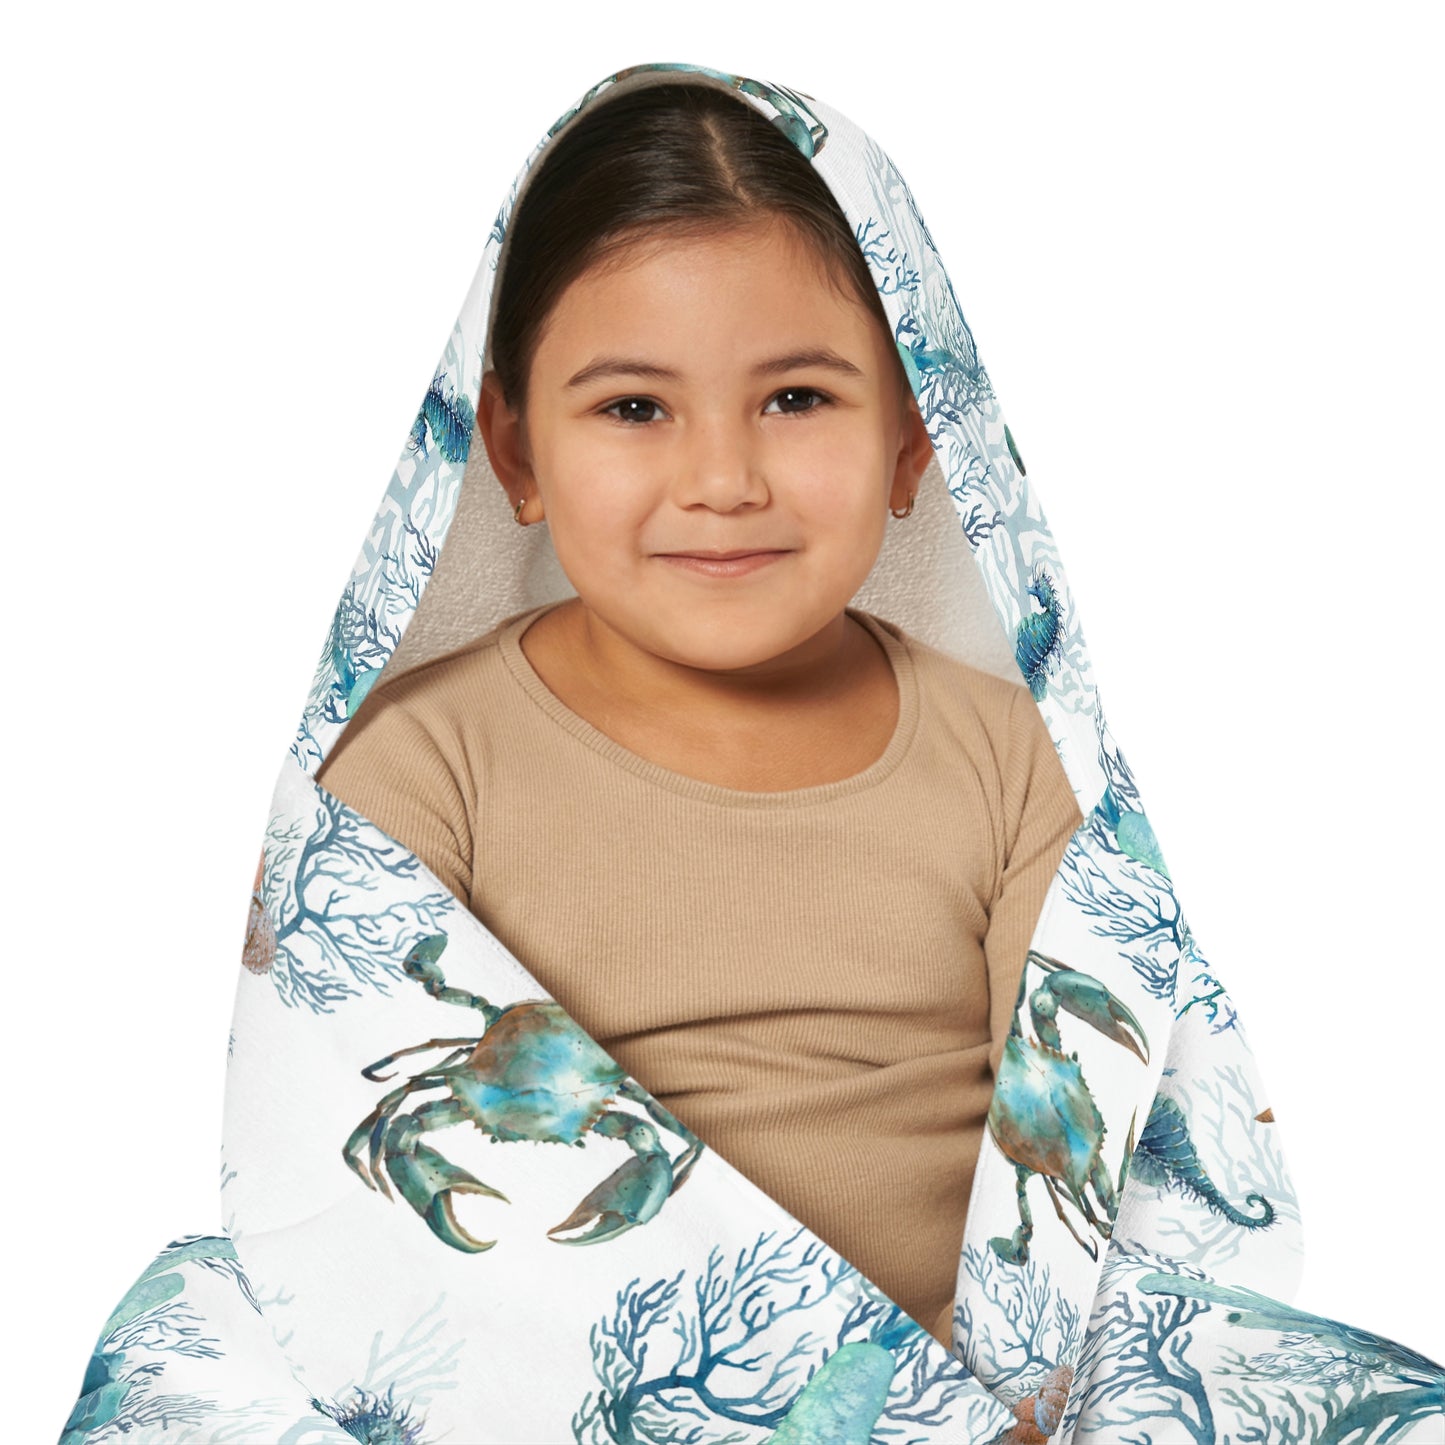 Watercolor Coral Reef Youth Hooded Towel